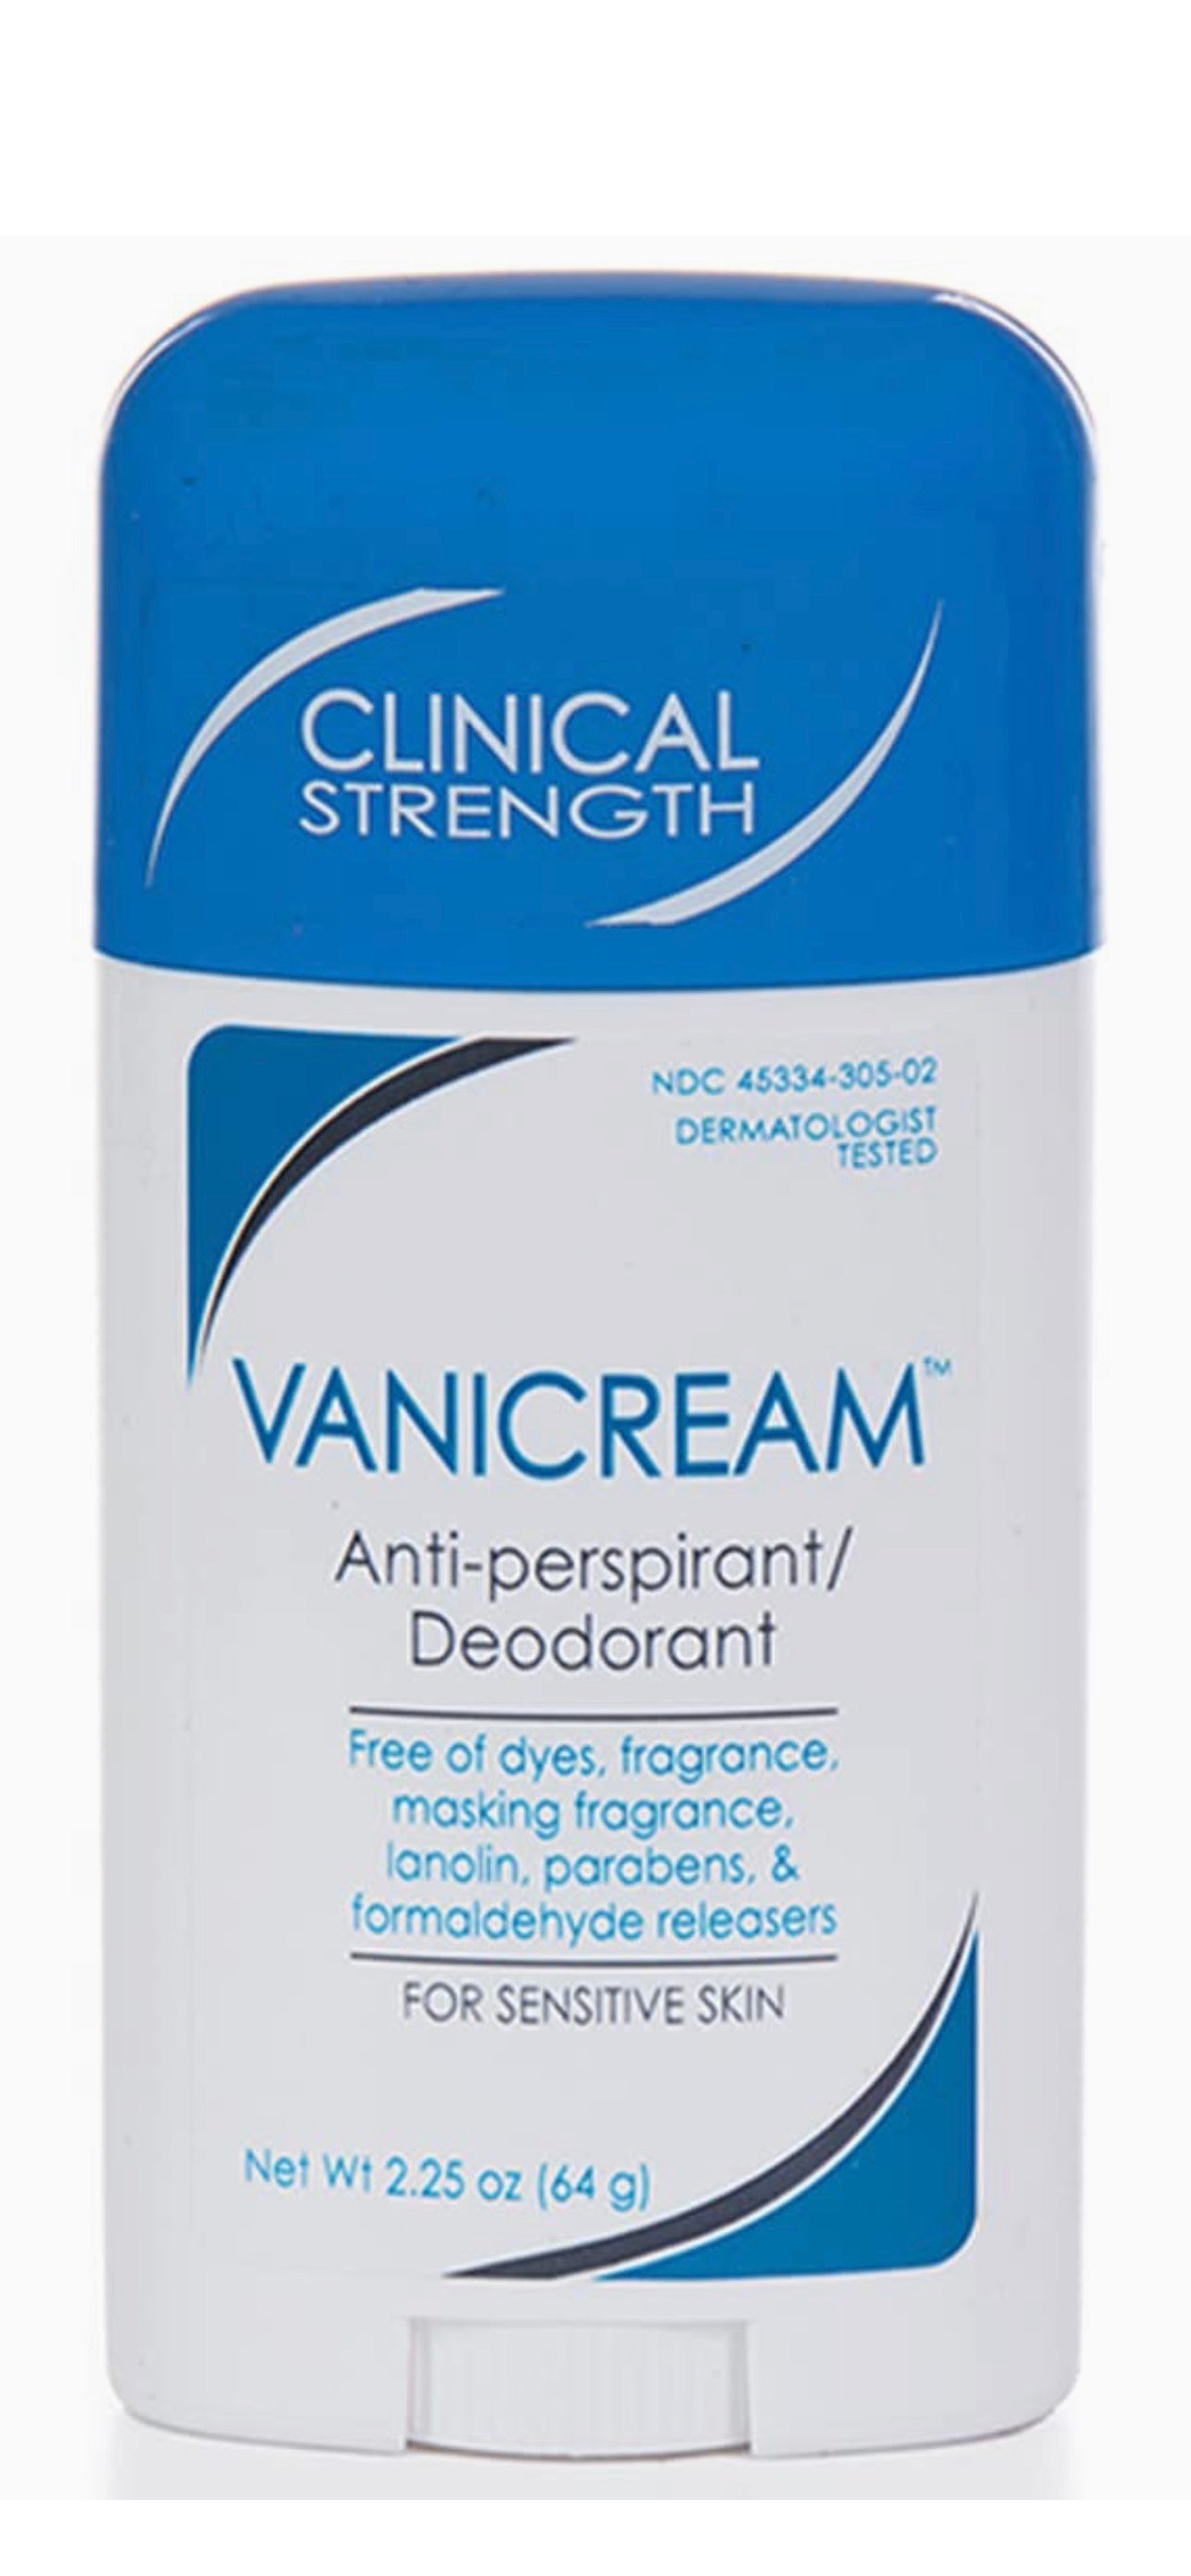 Vanicream Anti-Perspirant Deodorant Unscented for Sensitive Skin 2.25 oz Clinical-Strength Deodorant with 24-Hour Protection - Supporting ORCRF.org